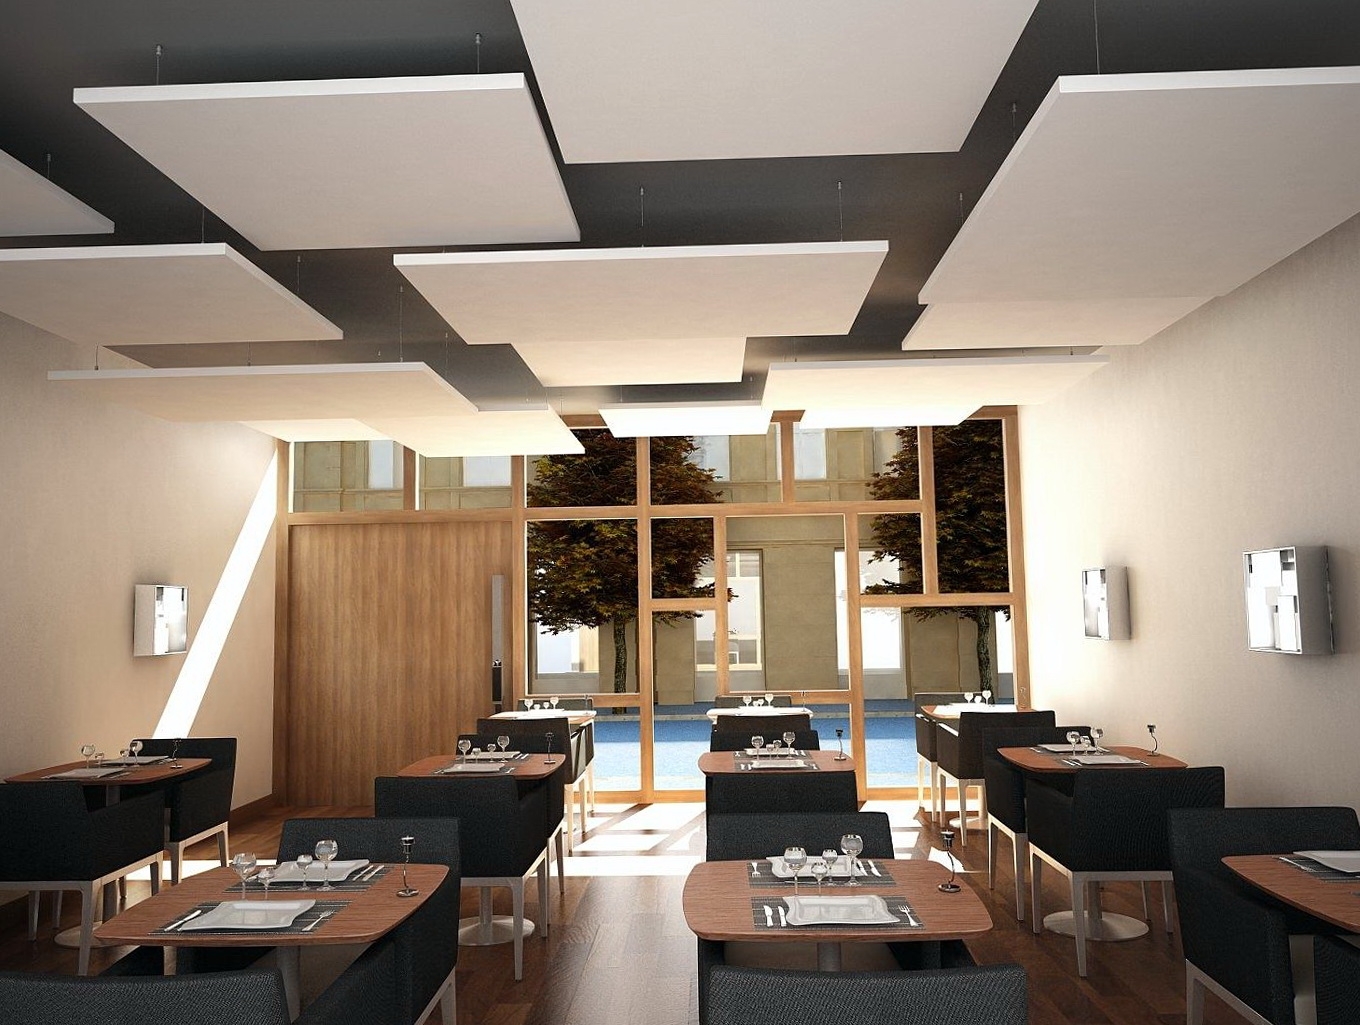 Armstrong Cloud Ceiling Tiles